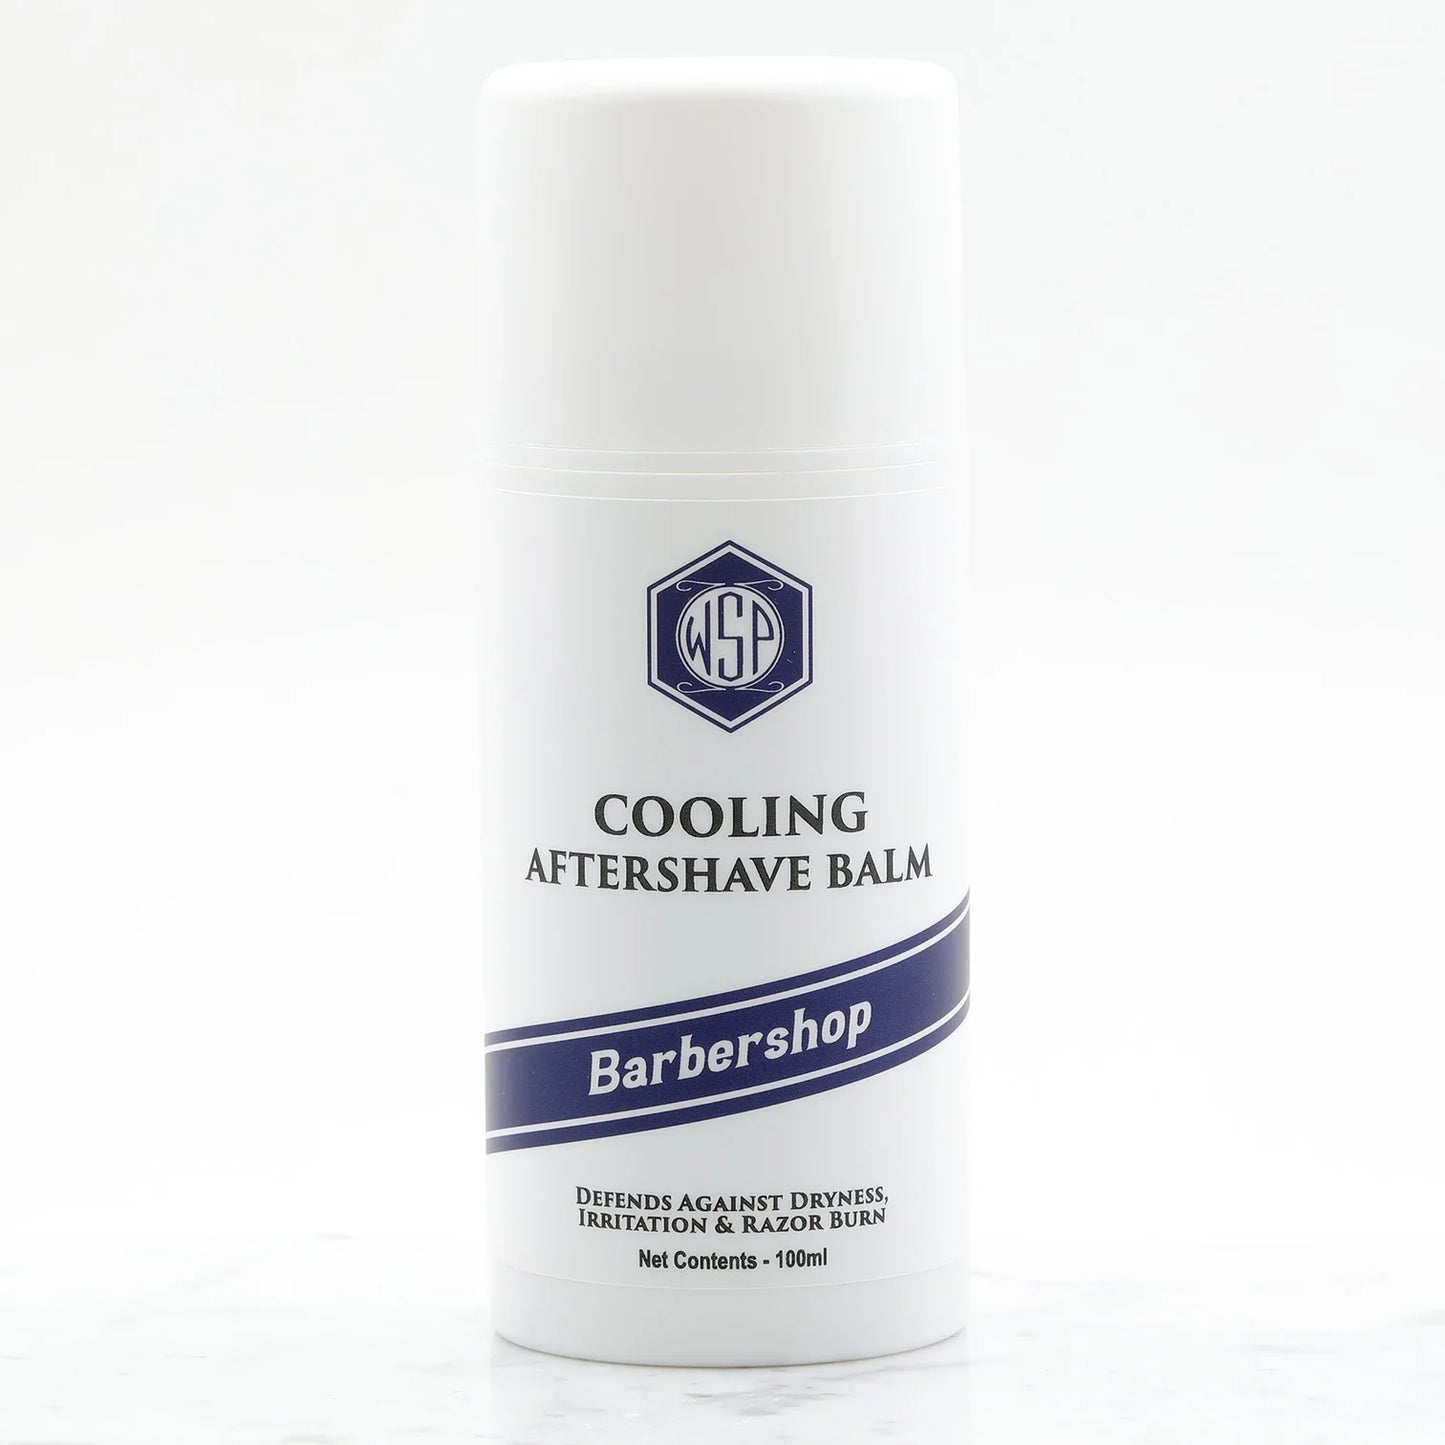 WSP Aftershave Balm (3.4 oz / 100mL)